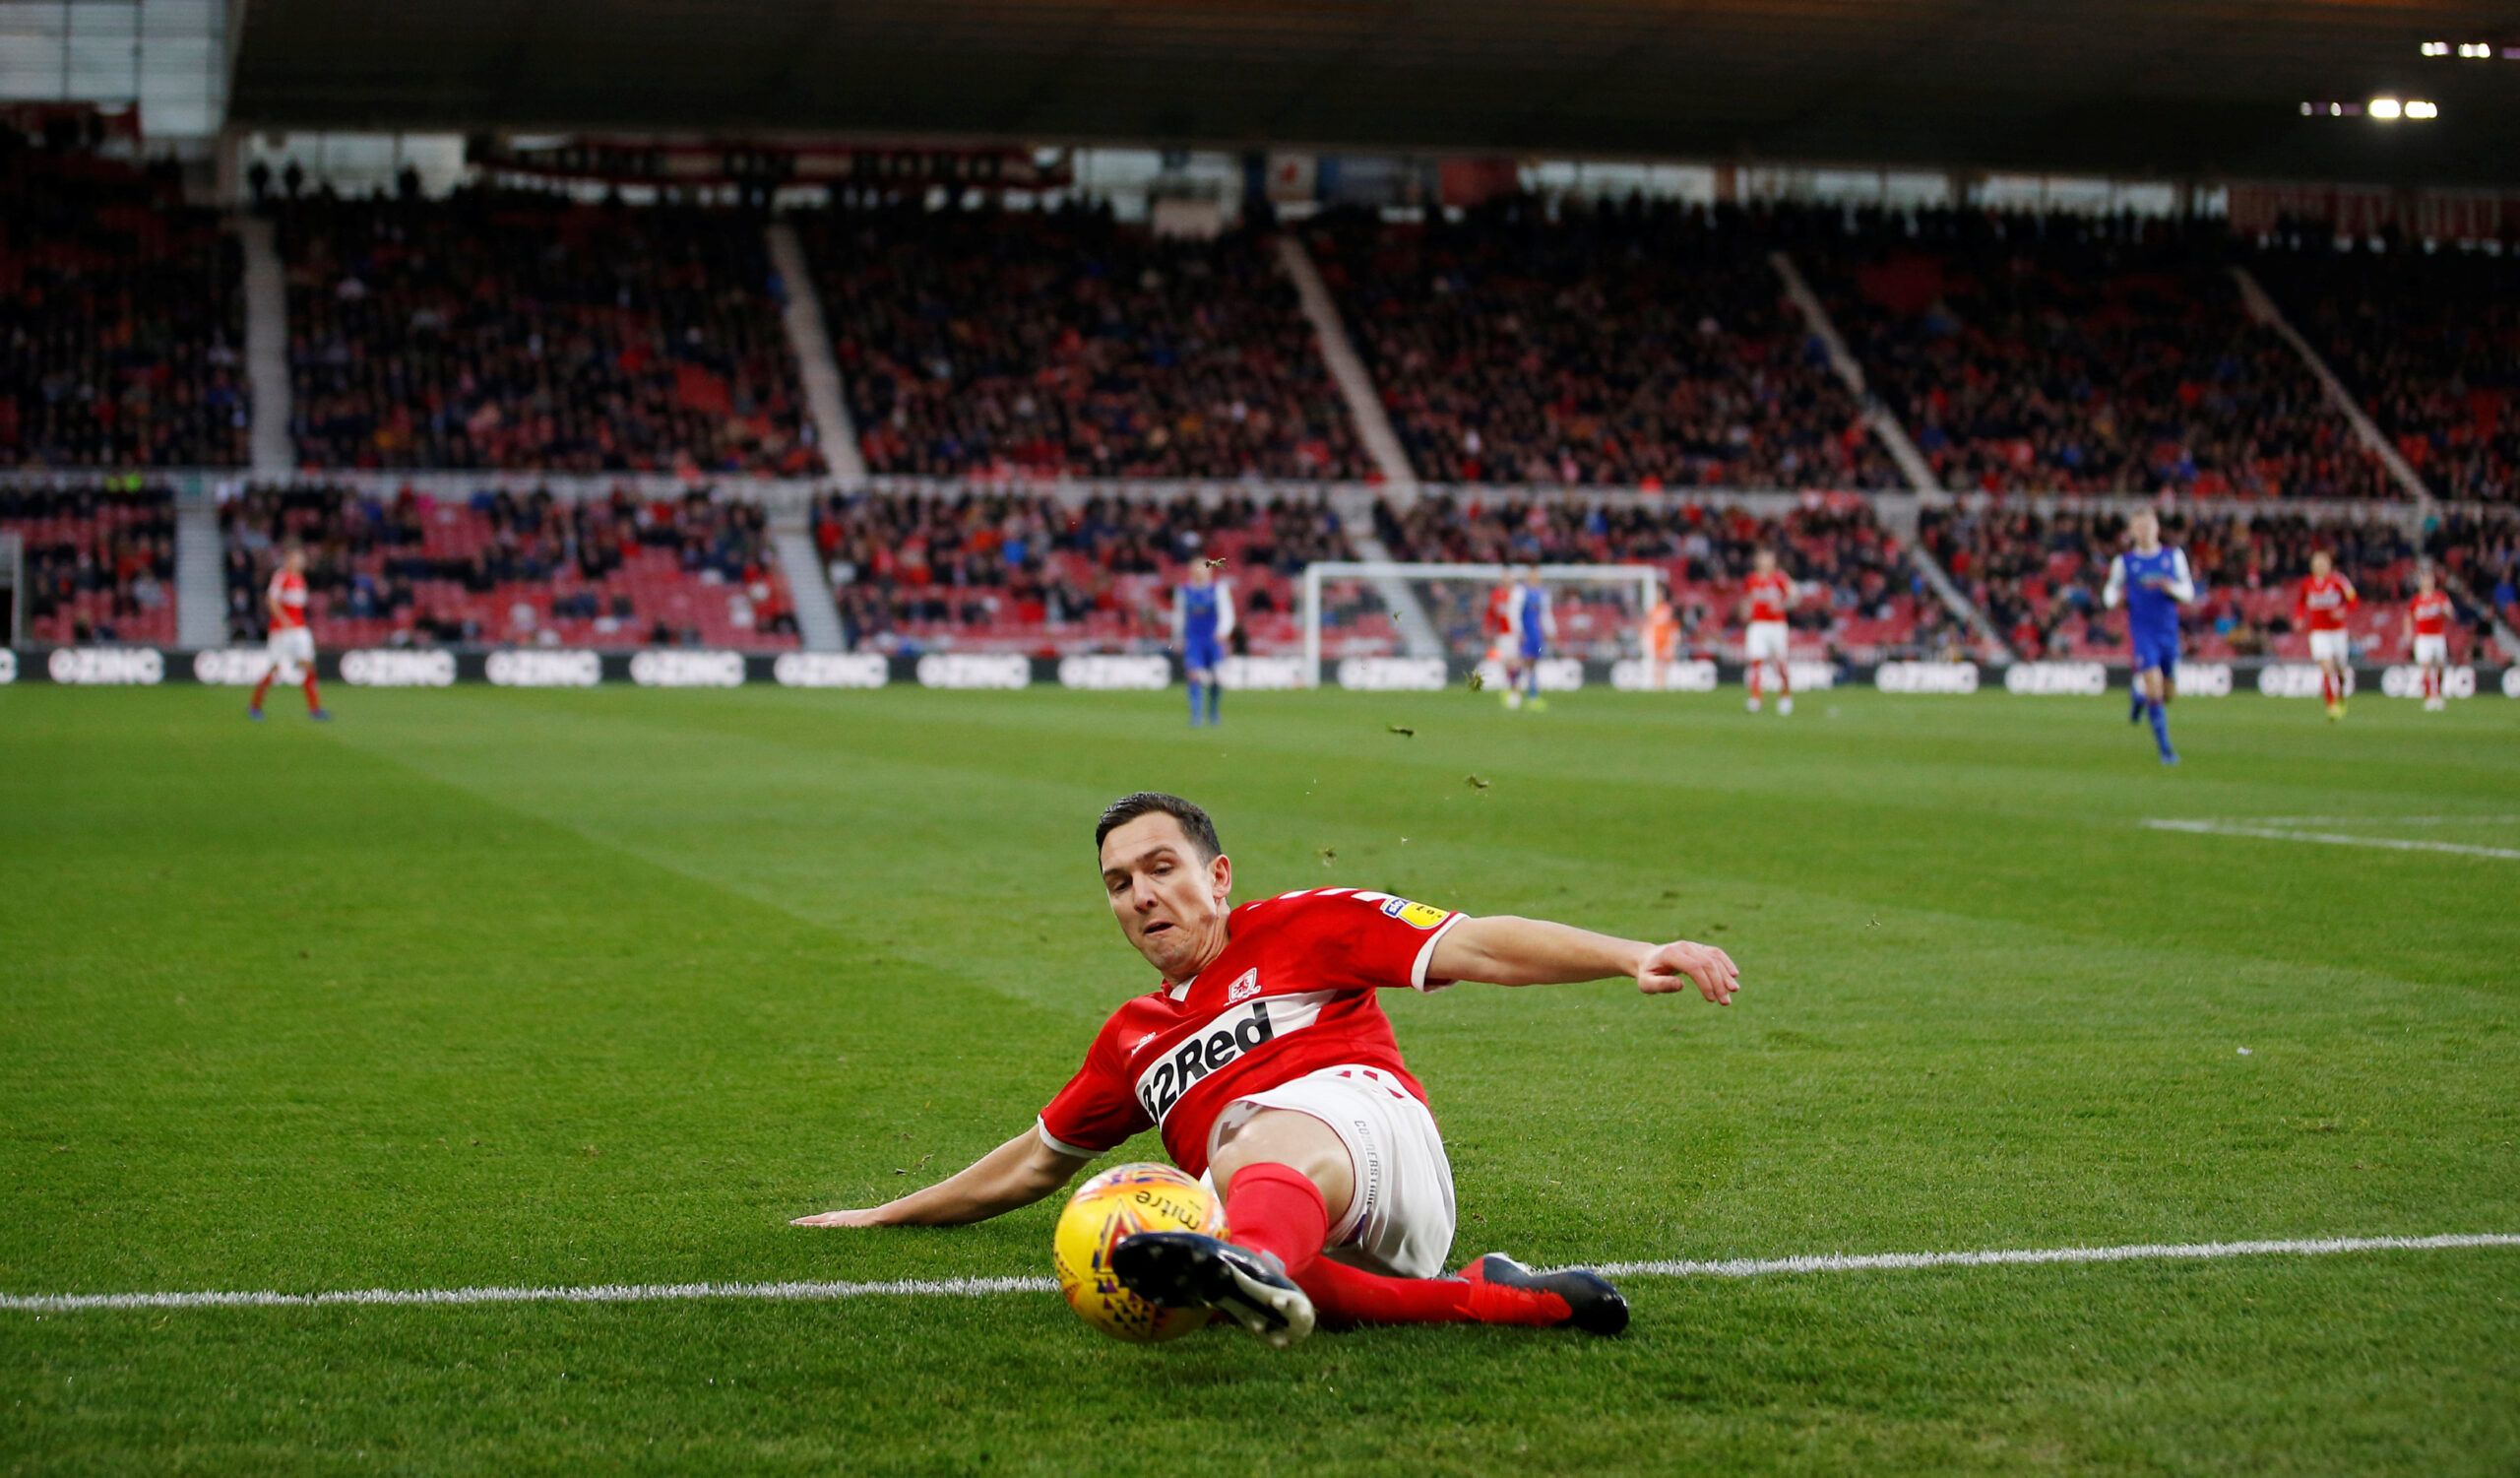 Soccer Football - Championship - Middlesbrough v Ipswich Town - Riverside Stadium, Middlesbrough, Britain - December 29, 2018   Middlesbrough's Stewart Downing in action   Action Images/Craig Brough    EDITORIAL USE ONLY. No use with unauthorized audio, video, data, fixture lists, club/league logos or 